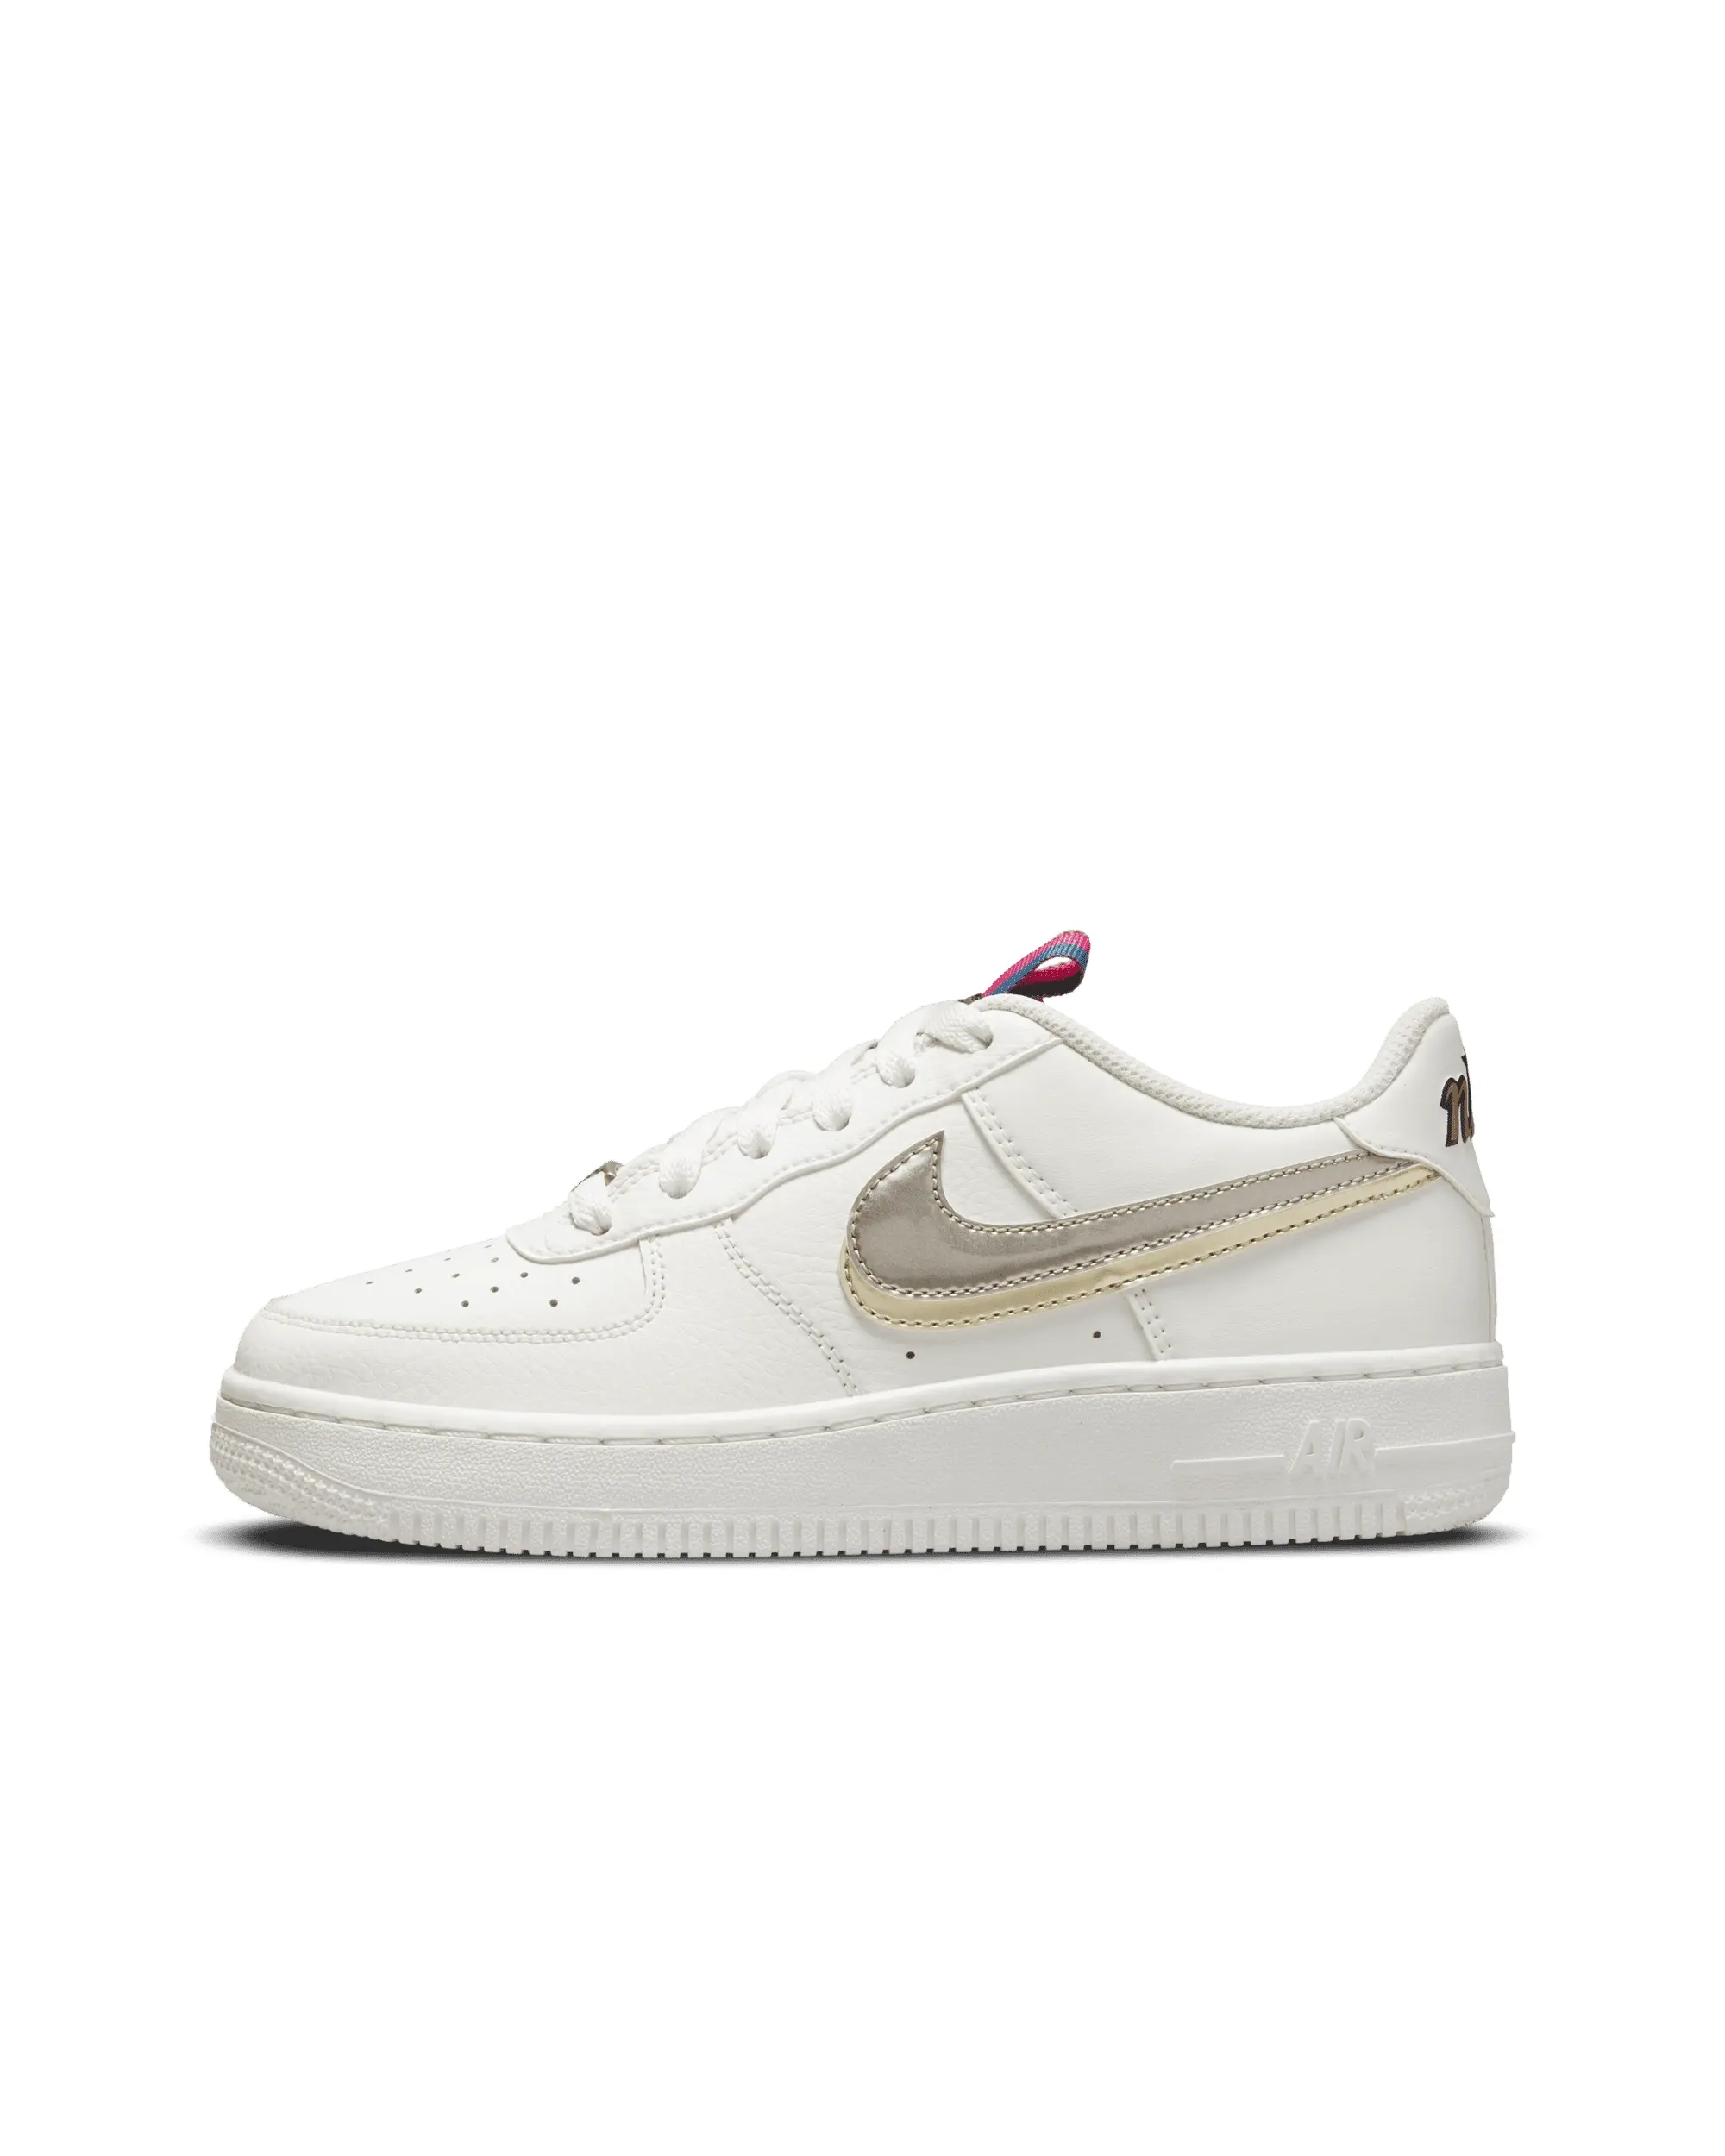 Nike Air Force 1 Low LV8 Double Swoosh Sail Gold GS